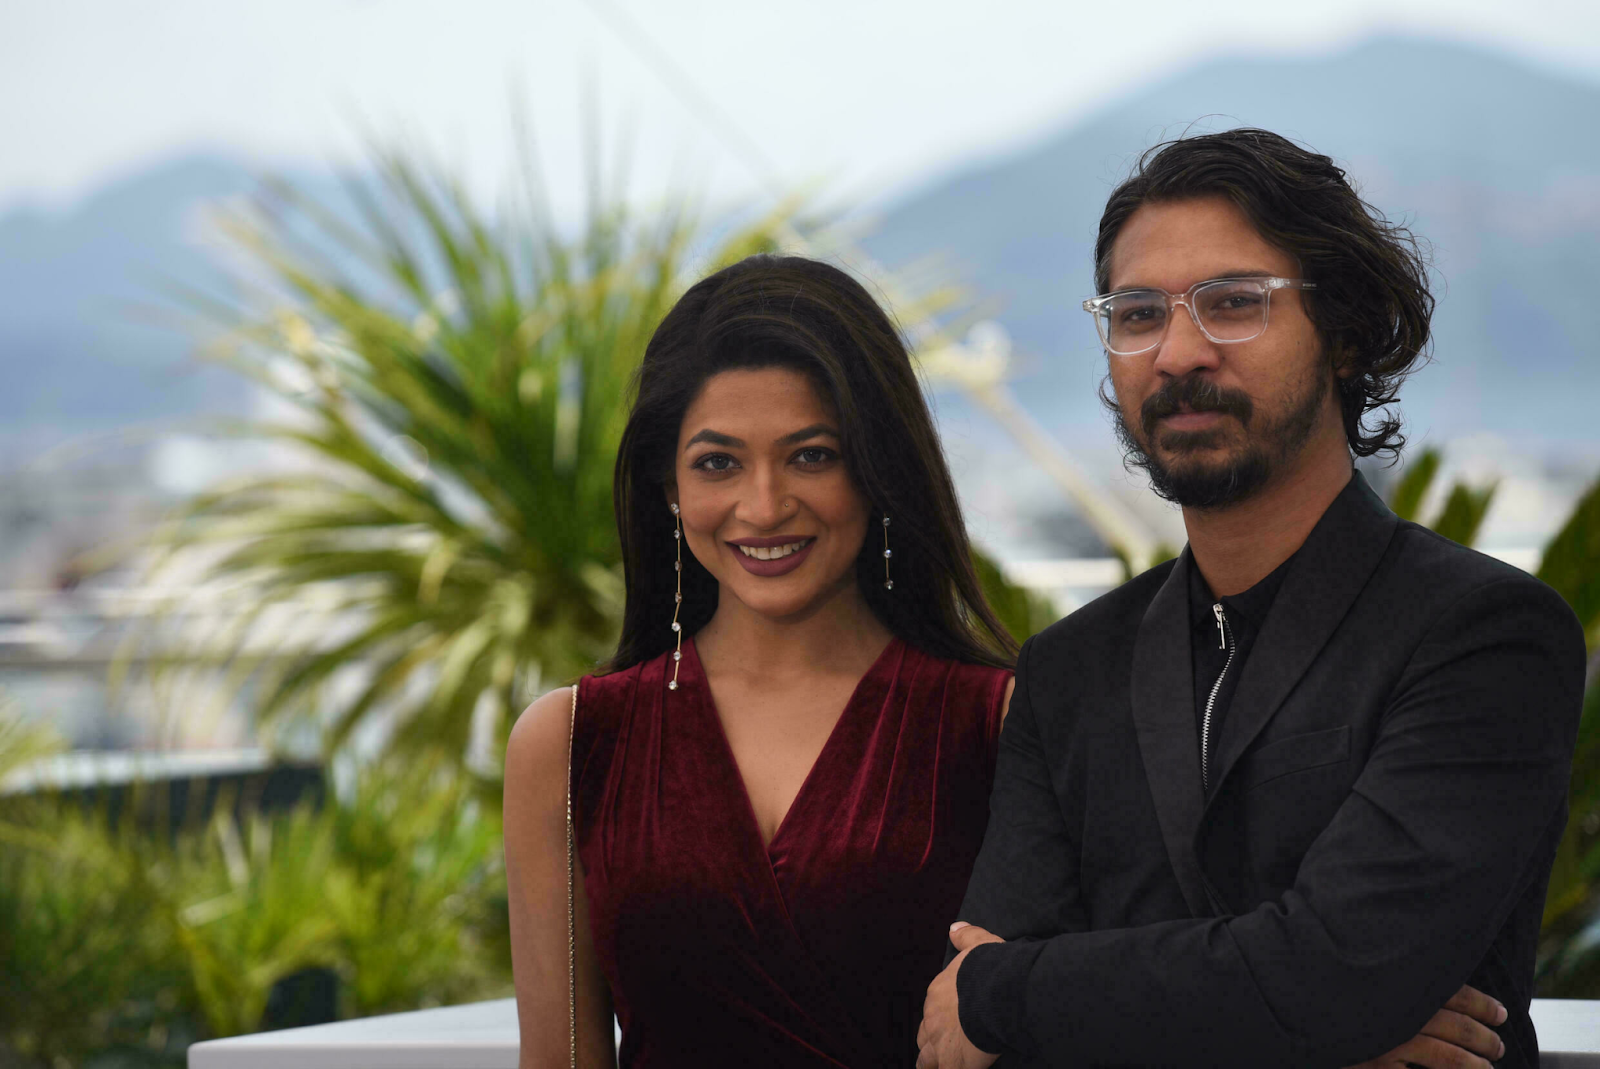 Watch: Cannes release photocall session of ‘Rehana Maryam Noor’ team